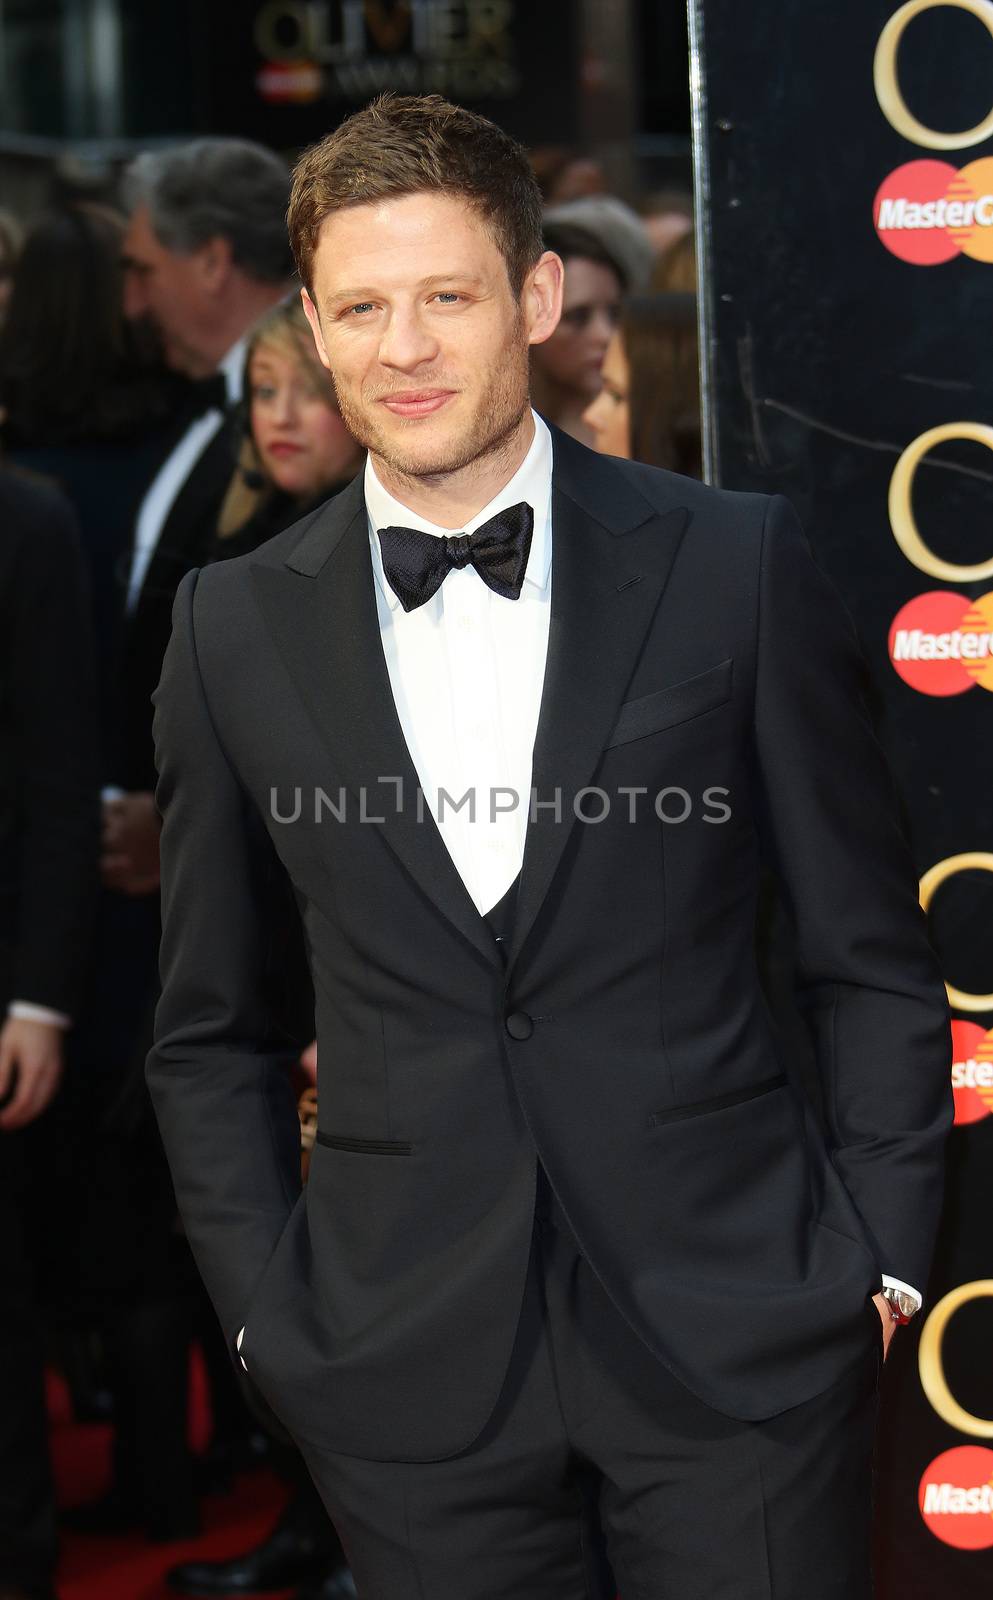 UK, London: James Norton hits the red carpet for the Olivier Awards at the Royal Opera House in London on April 3, 2016.